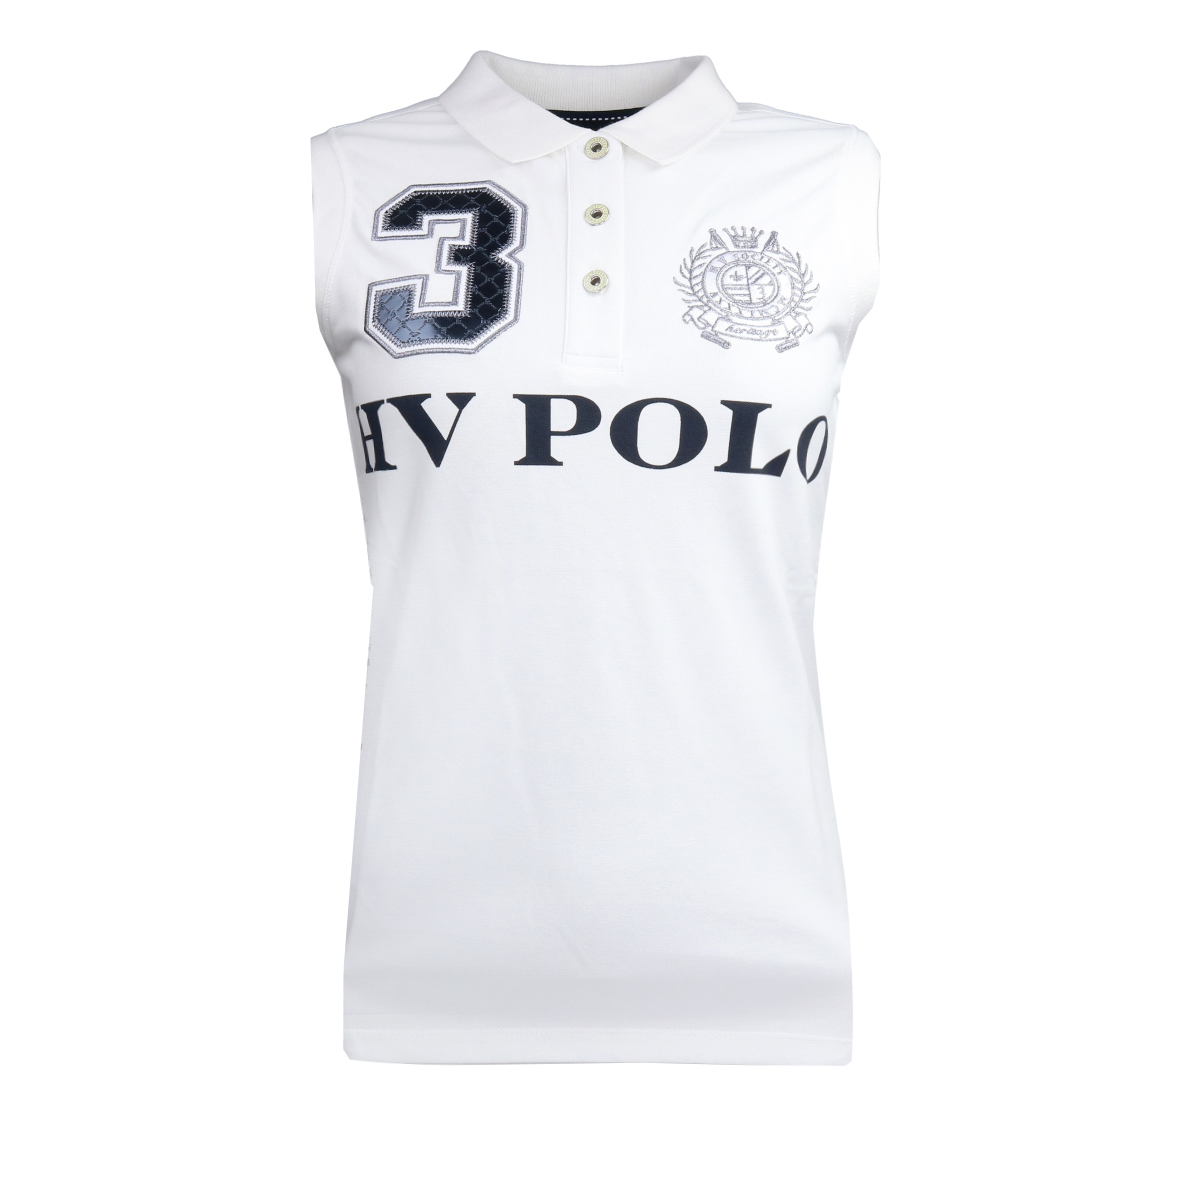 Polo Hv Polo Favouritas Luxury Mouwloos Wit, XS in wit